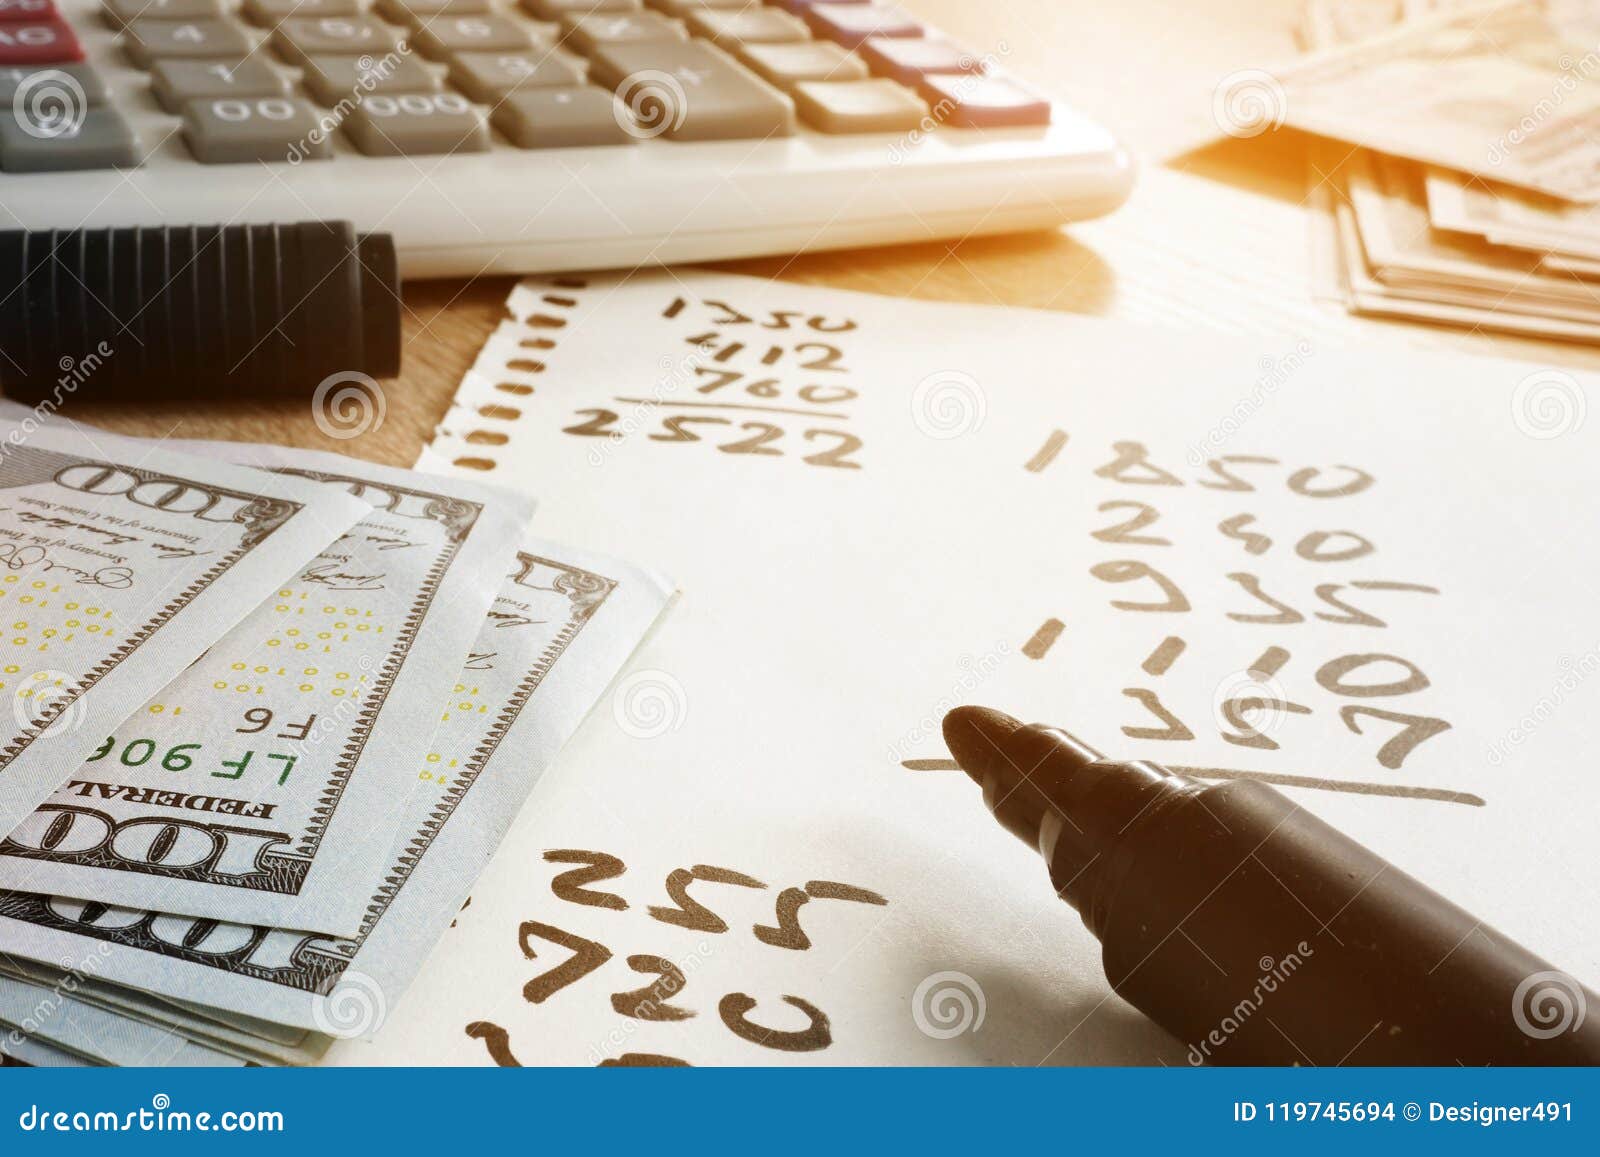 home finances. paper with calculations, calculator and money.